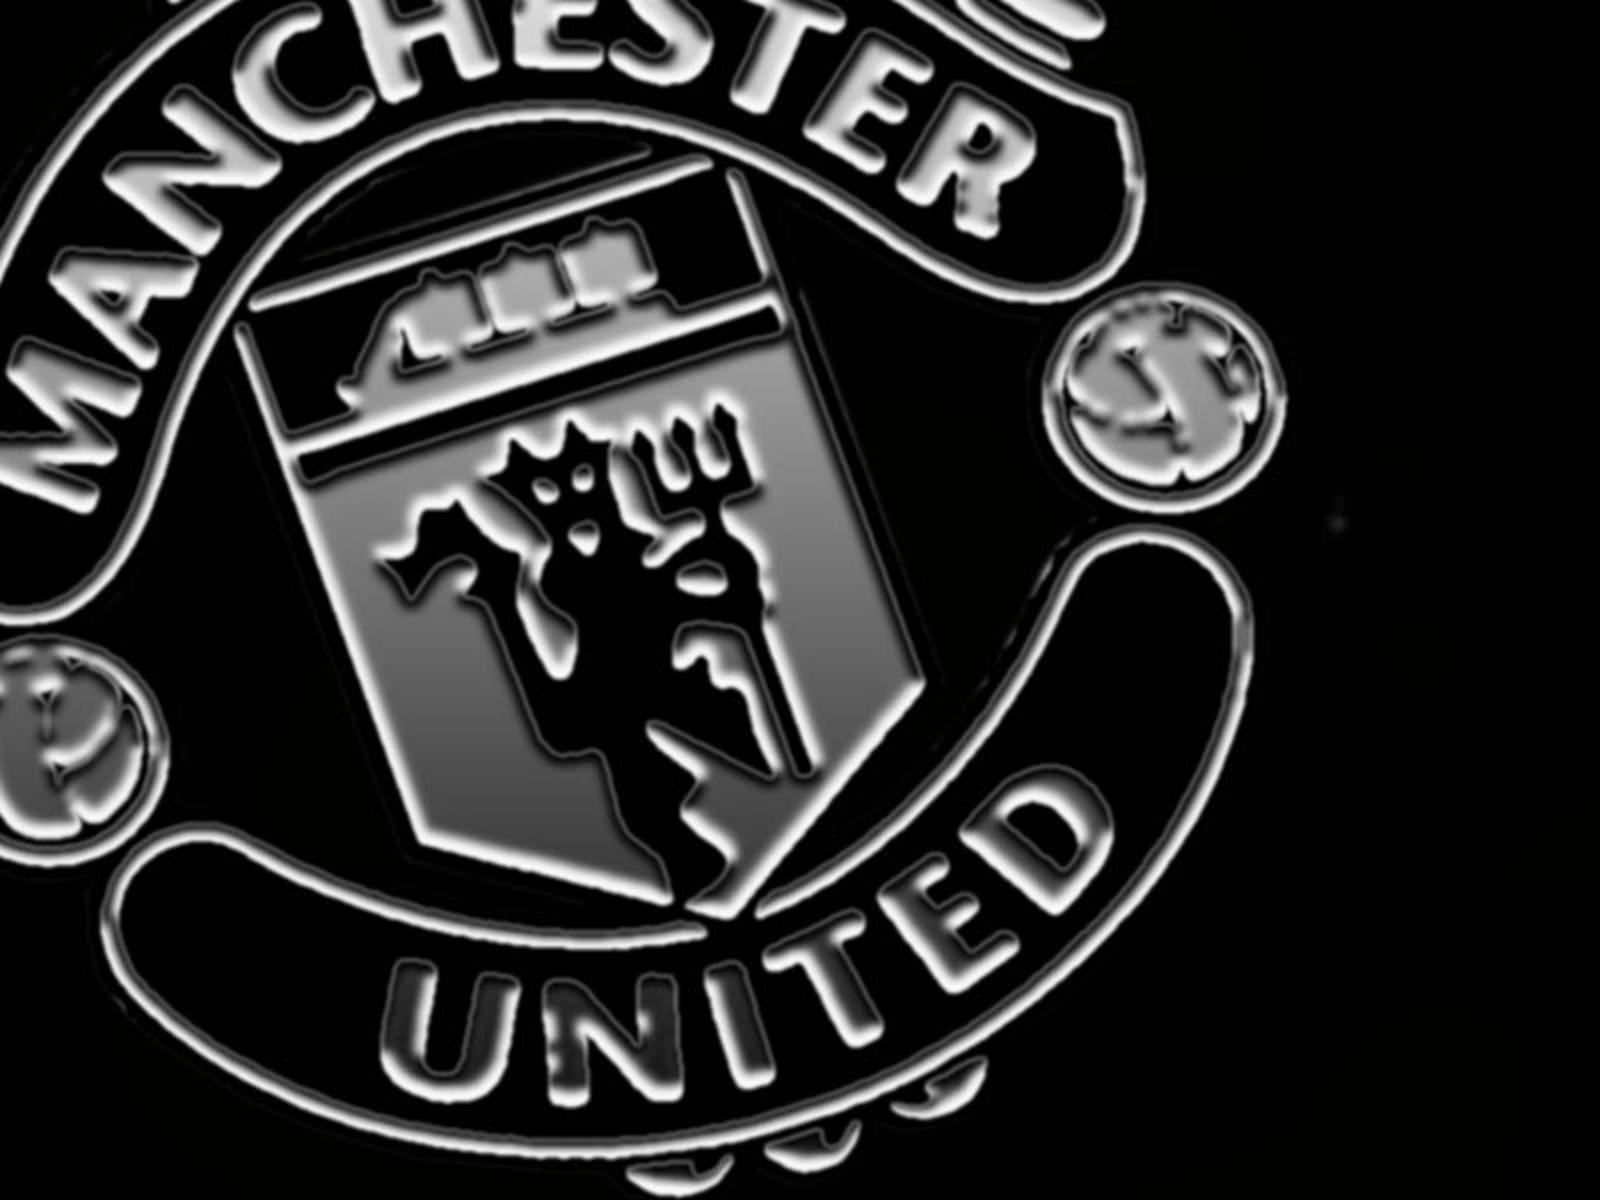 Manchester United Logo Wallpaper 2020 - Download Wallpapers Manchester